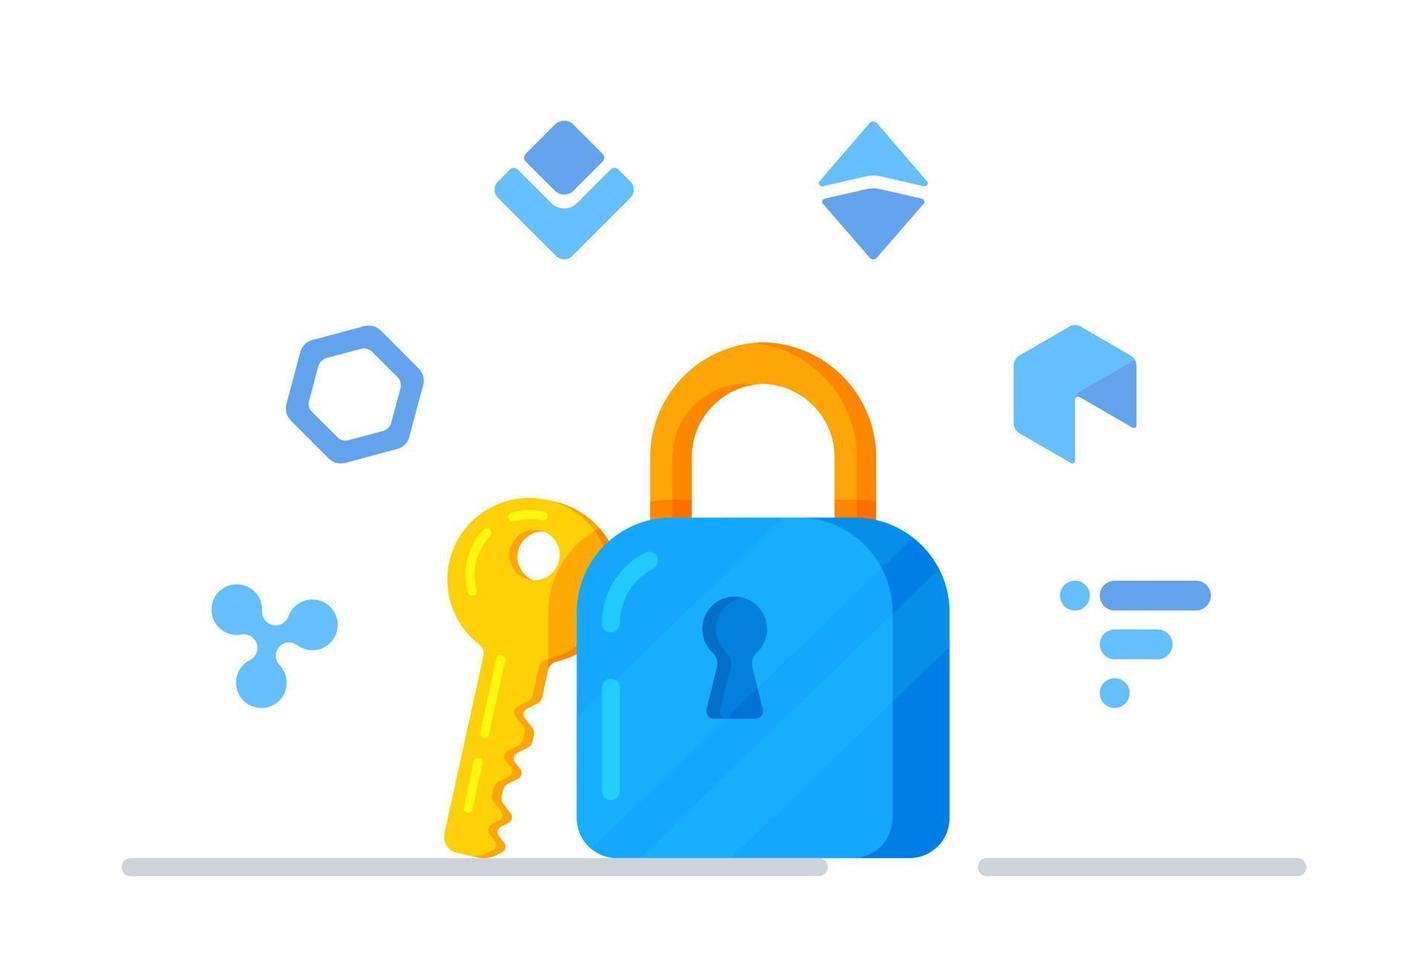 Vector illustration of crypto security. Lock with a key. Lock symbol. Cryptocurrency. Six icons of digital currency.